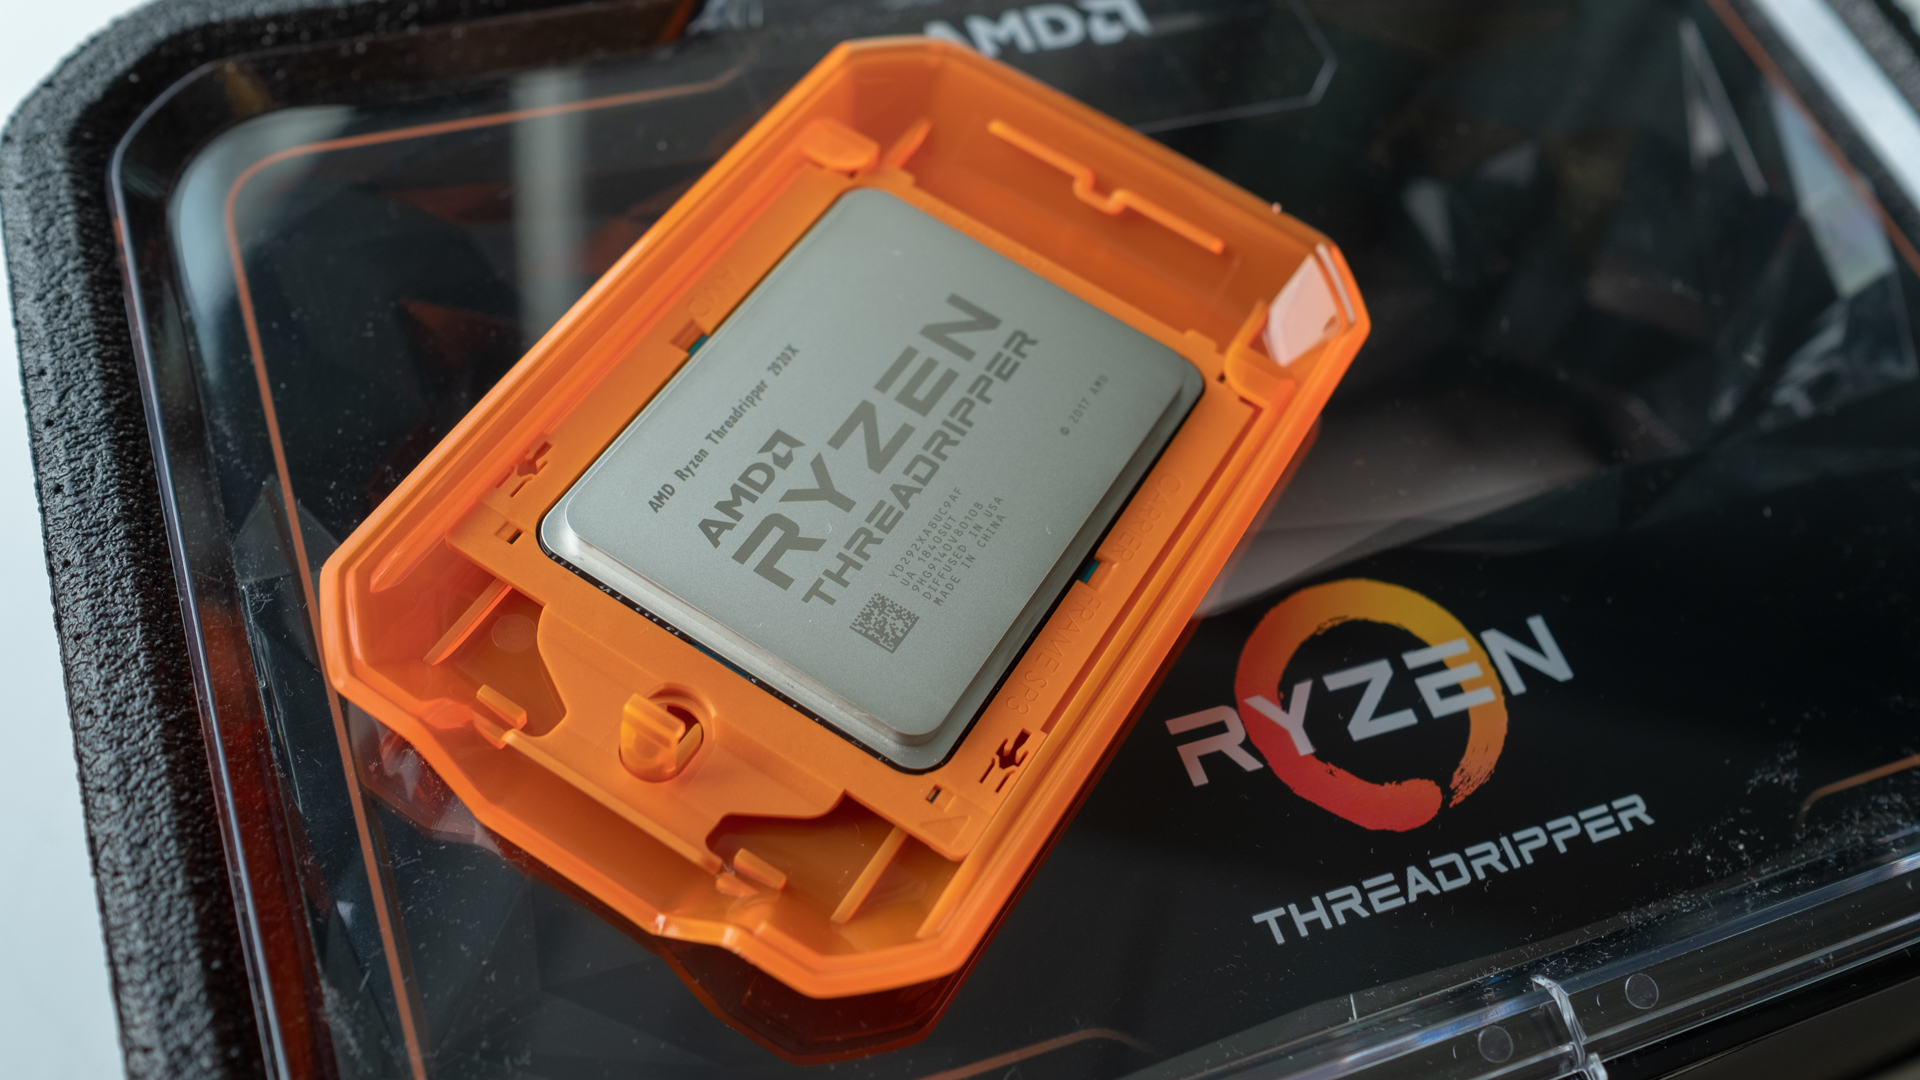 AMD's new 64-core Threadripper Pro CPU is now on sale - but you